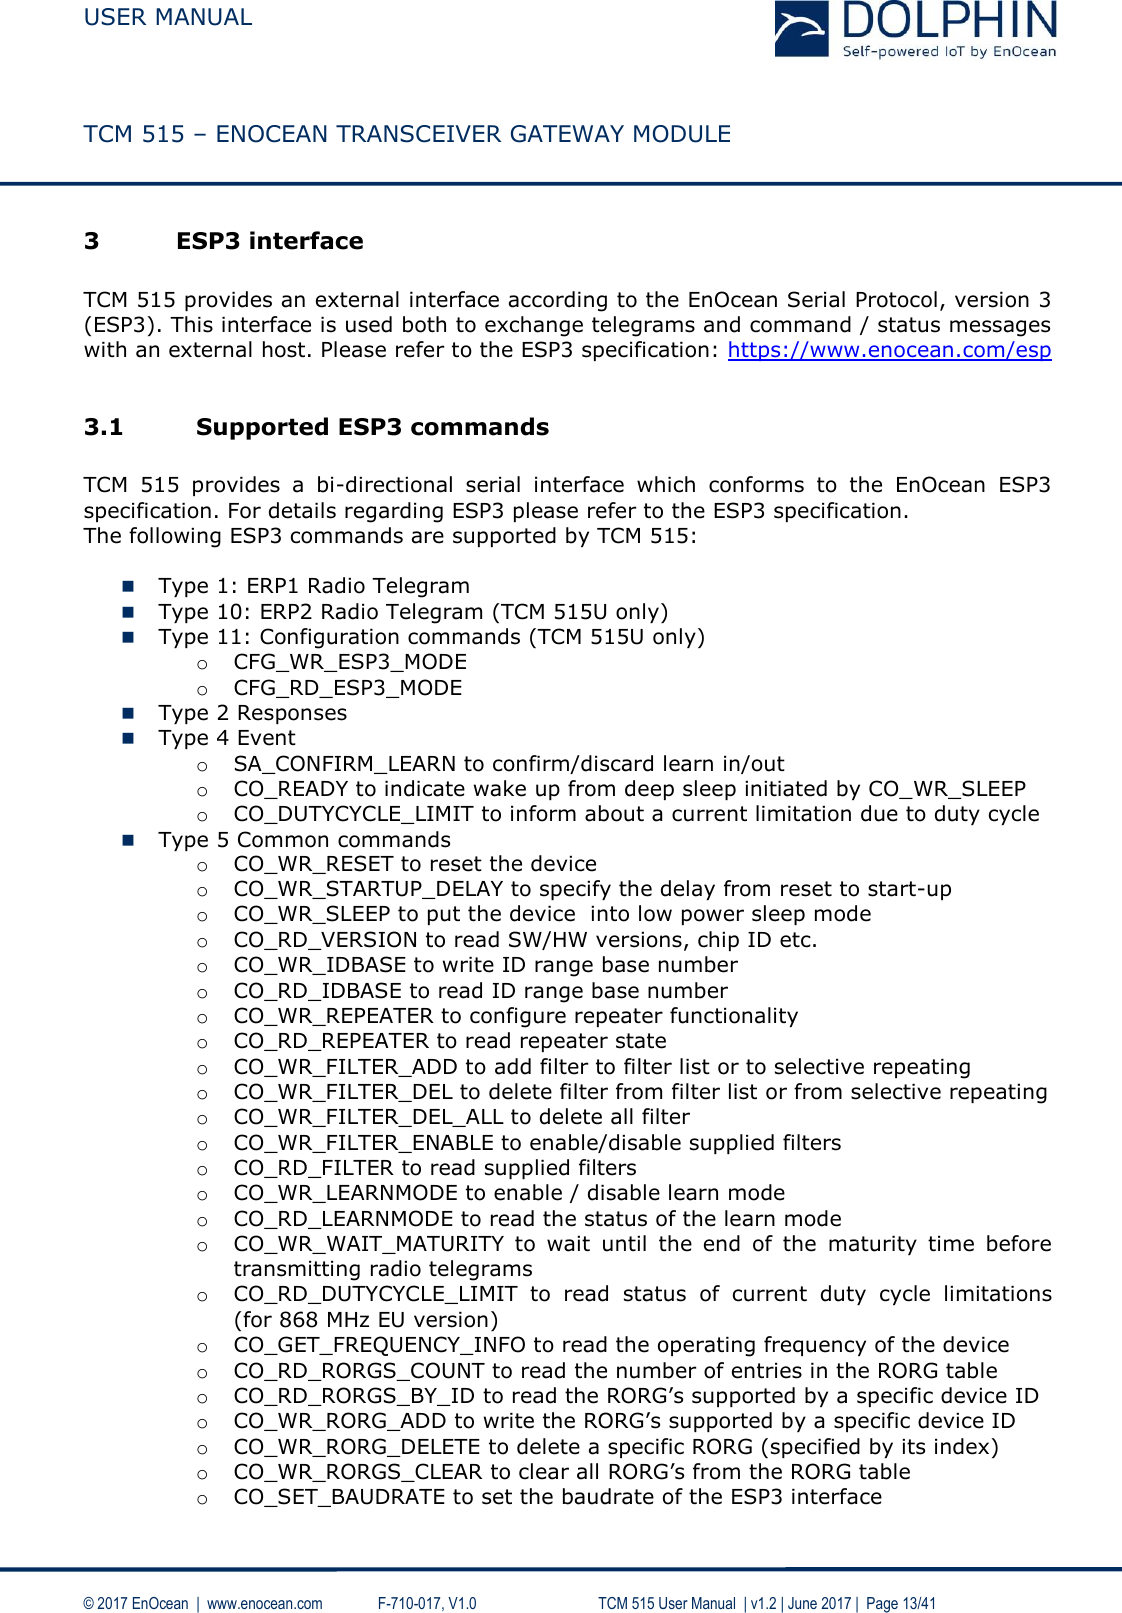  USER MANUAL    TCM 515 – ENOCEAN TRANSCEIVER GATEWAY MODULE  © 2017 EnOcean  |  www.enocean.com   F-710-017, V1.0        TCM 515 User Manual  | v1.2 | June 2017 |  Page 13/41  3 ESP3 interface  TCM 515 provides an external interface according to the EnOcean Serial Protocol, version 3 (ESP3). This interface is used both to exchange telegrams and command / status messages with an external host. Please refer to the ESP3 specification: https://www.enocean.com/esp   3.1 Supported ESP3 commands   TCM  515  provides  a  bi-directional  serial  interface  which  conforms  to  the  EnOcean  ESP3 specification. For details regarding ESP3 please refer to the ESP3 specification.  The following ESP3 commands are supported by TCM 515:   Type 1: ERP1 Radio Telegram   Type 10: ERP2 Radio Telegram (TCM 515U only)  Type 11: Configuration commands (TCM 515U only) o CFG_WR_ESP3_MODE o CFG_RD_ESP3_MODE  Type 2 Responses   Type 4 Event  o SA_CONFIRM_LEARN to confirm/discard learn in/out o CO_READY to indicate wake up from deep sleep initiated by CO_WR_SLEEP o CO_DUTYCYCLE_LIMIT to inform about a current limitation due to duty cycle    Type 5 Common commands  o CO_WR_RESET to reset the device  o CO_WR_STARTUP_DELAY to specify the delay from reset to start-up o CO_WR_SLEEP to put the device  into low power sleep mode o CO_RD_VERSION to read SW/HW versions, chip ID etc.  o CO_WR_IDBASE to write ID range base number  o CO_RD_IDBASE to read ID range base number  o CO_WR_REPEATER to configure repeater functionality  o CO_RD_REPEATER to read repeater state  o CO_WR_FILTER_ADD to add filter to filter list or to selective repeating o CO_WR_FILTER_DEL to delete filter from filter list or from selective repeating o CO_WR_FILTER_DEL_ALL to delete all filter  o CO_WR_FILTER_ENABLE to enable/disable supplied filters  o CO_RD_FILTER to read supplied filters  o CO_WR_LEARNMODE to enable / disable learn mode o CO_RD_LEARNMODE to read the status of the learn mode o CO_WR_WAIT_MATURITY  to  wait  until  the  end  of  the  maturity  time  before transmitting radio telegrams  o CO_RD_DUTYCYCLE_LIMIT  to  read  status  of  current  duty  cycle  limitations (for 868 MHz EU version)   o CO_GET_FREQUENCY_INFO to read the operating frequency of the device o CO_RD_RORGS_COUNT to read the number of entries in the RORG table o CO_RD_RORGS_BY_ID to read the RORG’s supported by a specific device ID o CO_WR_RORG_ADD to write the RORG’s supported by a specific device ID o CO_WR_RORG_DELETE to delete a specific RORG (specified by its index)  o CO_WR_RORGS_CLEAR to clear all RORG’s from the RORG table o CO_SET_BAUDRATE to set the baudrate of the ESP3 interface   